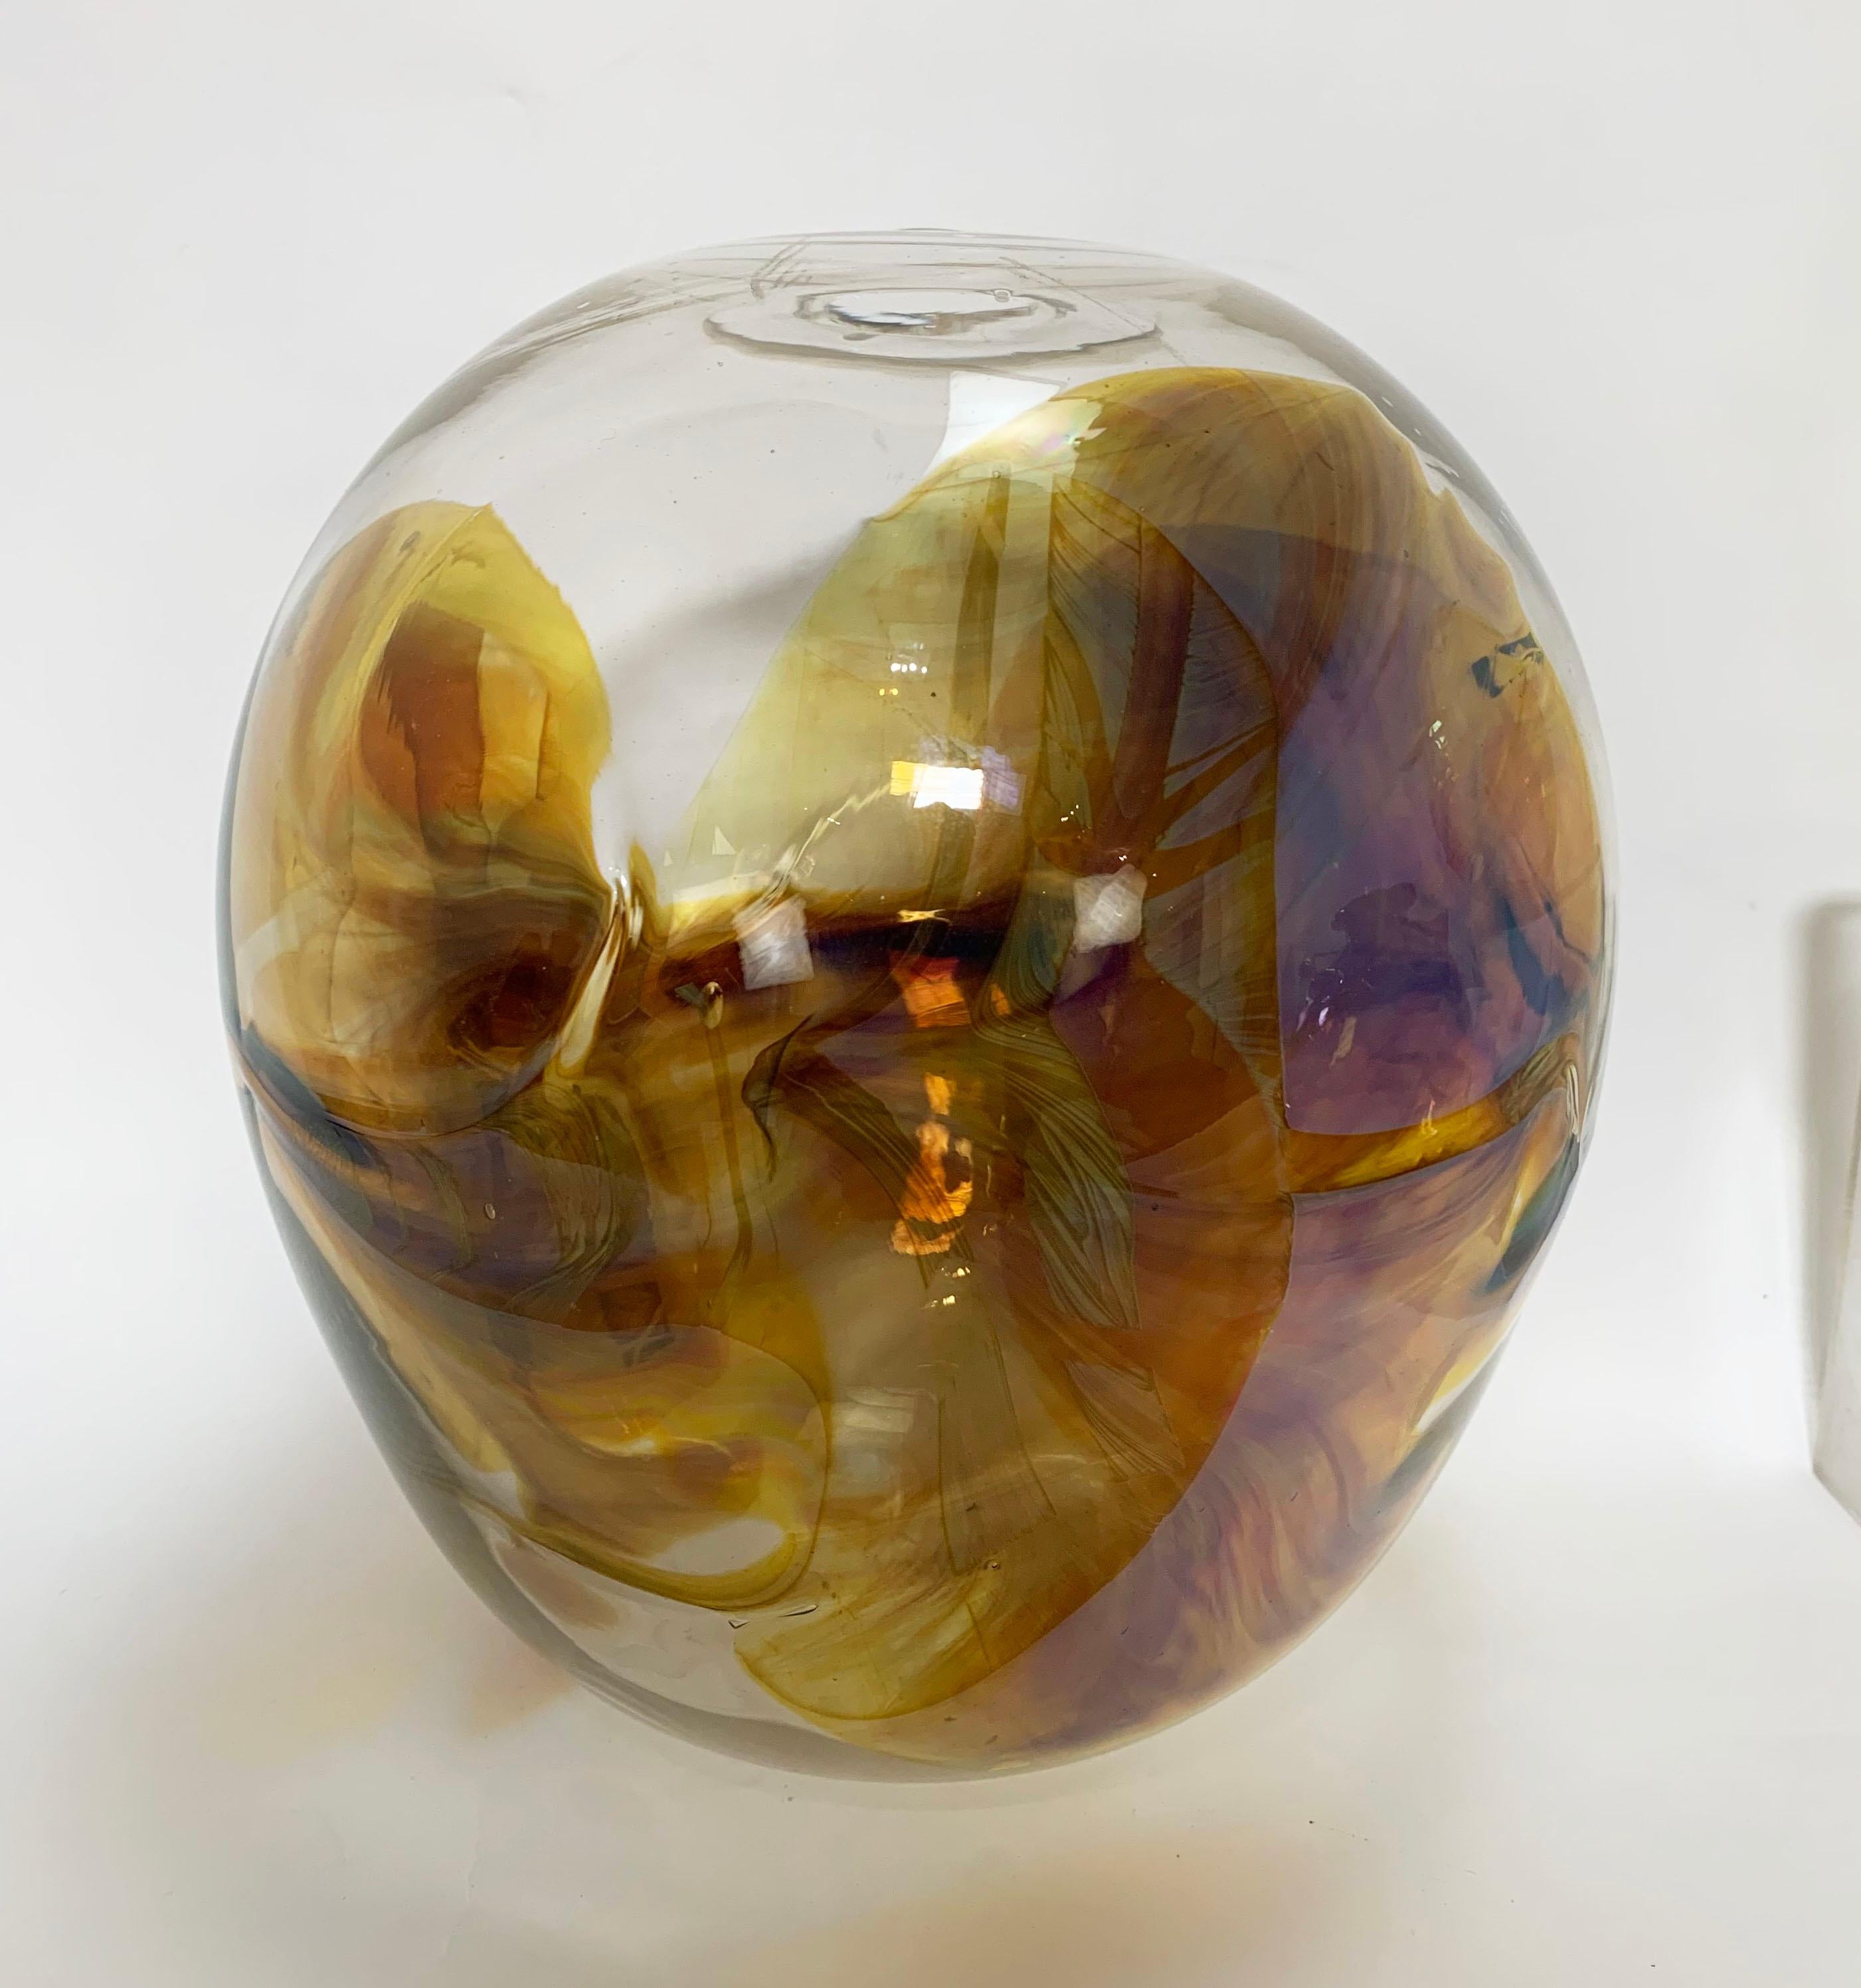 Collection of three early hand blown glass sculptural orb vases by noted Vermont glass artist Peter (Paedra) Bramhall, dated 1973, 1979, 1980. Tallest one (on left) 10.25” high, 9.5